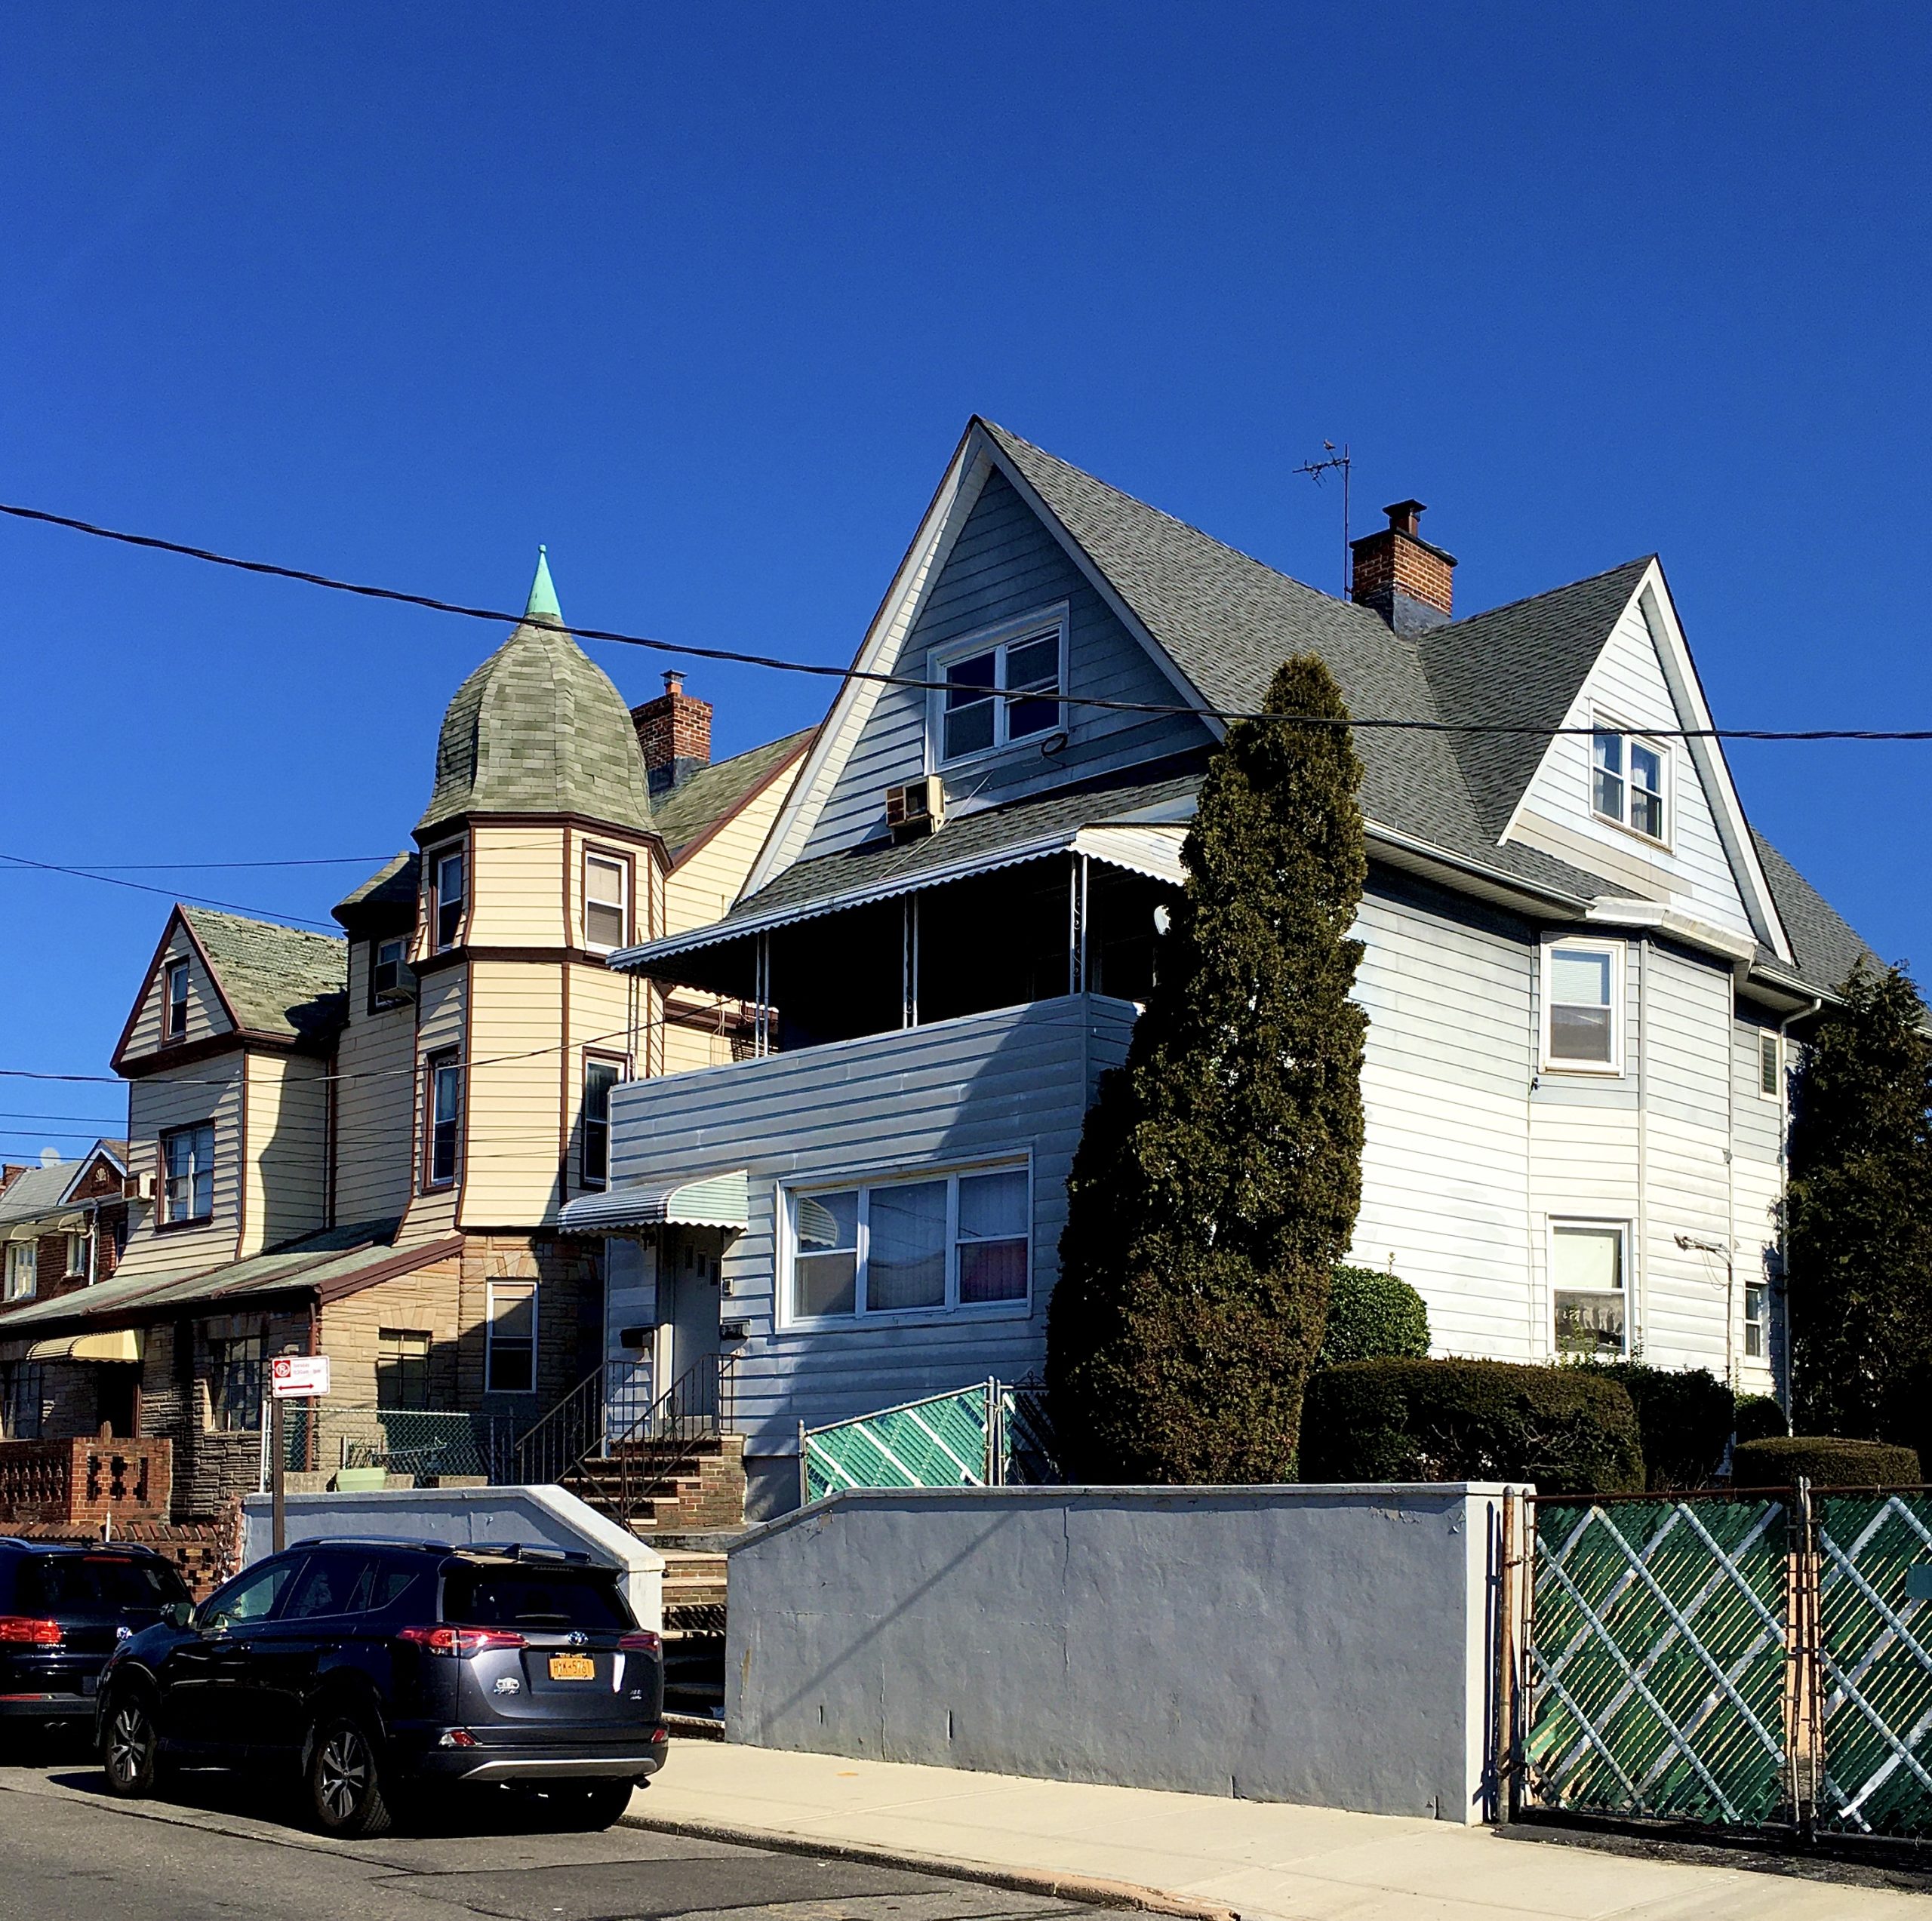 The house with the bell-shaped turret roof is 137 Bay 11th St. in Bath Beach. Photo: Lore Croghan/Brooklyn Eagle